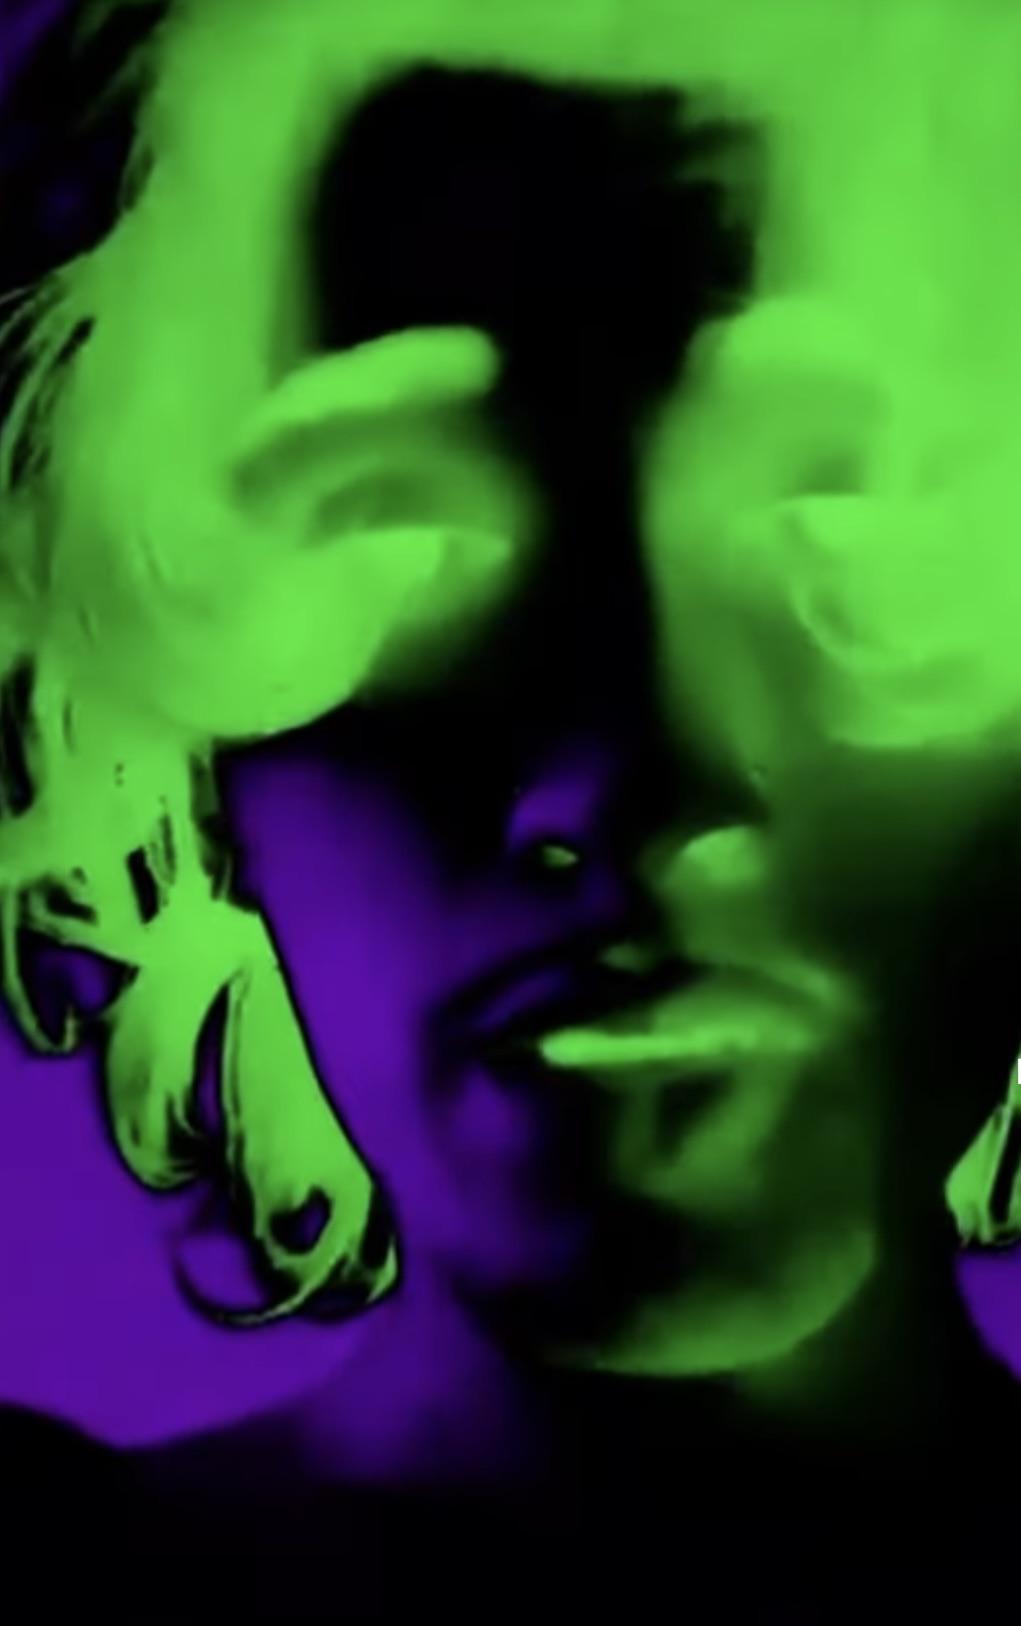 A man's face is shown in a purple and green hue. - Lime green, neon green